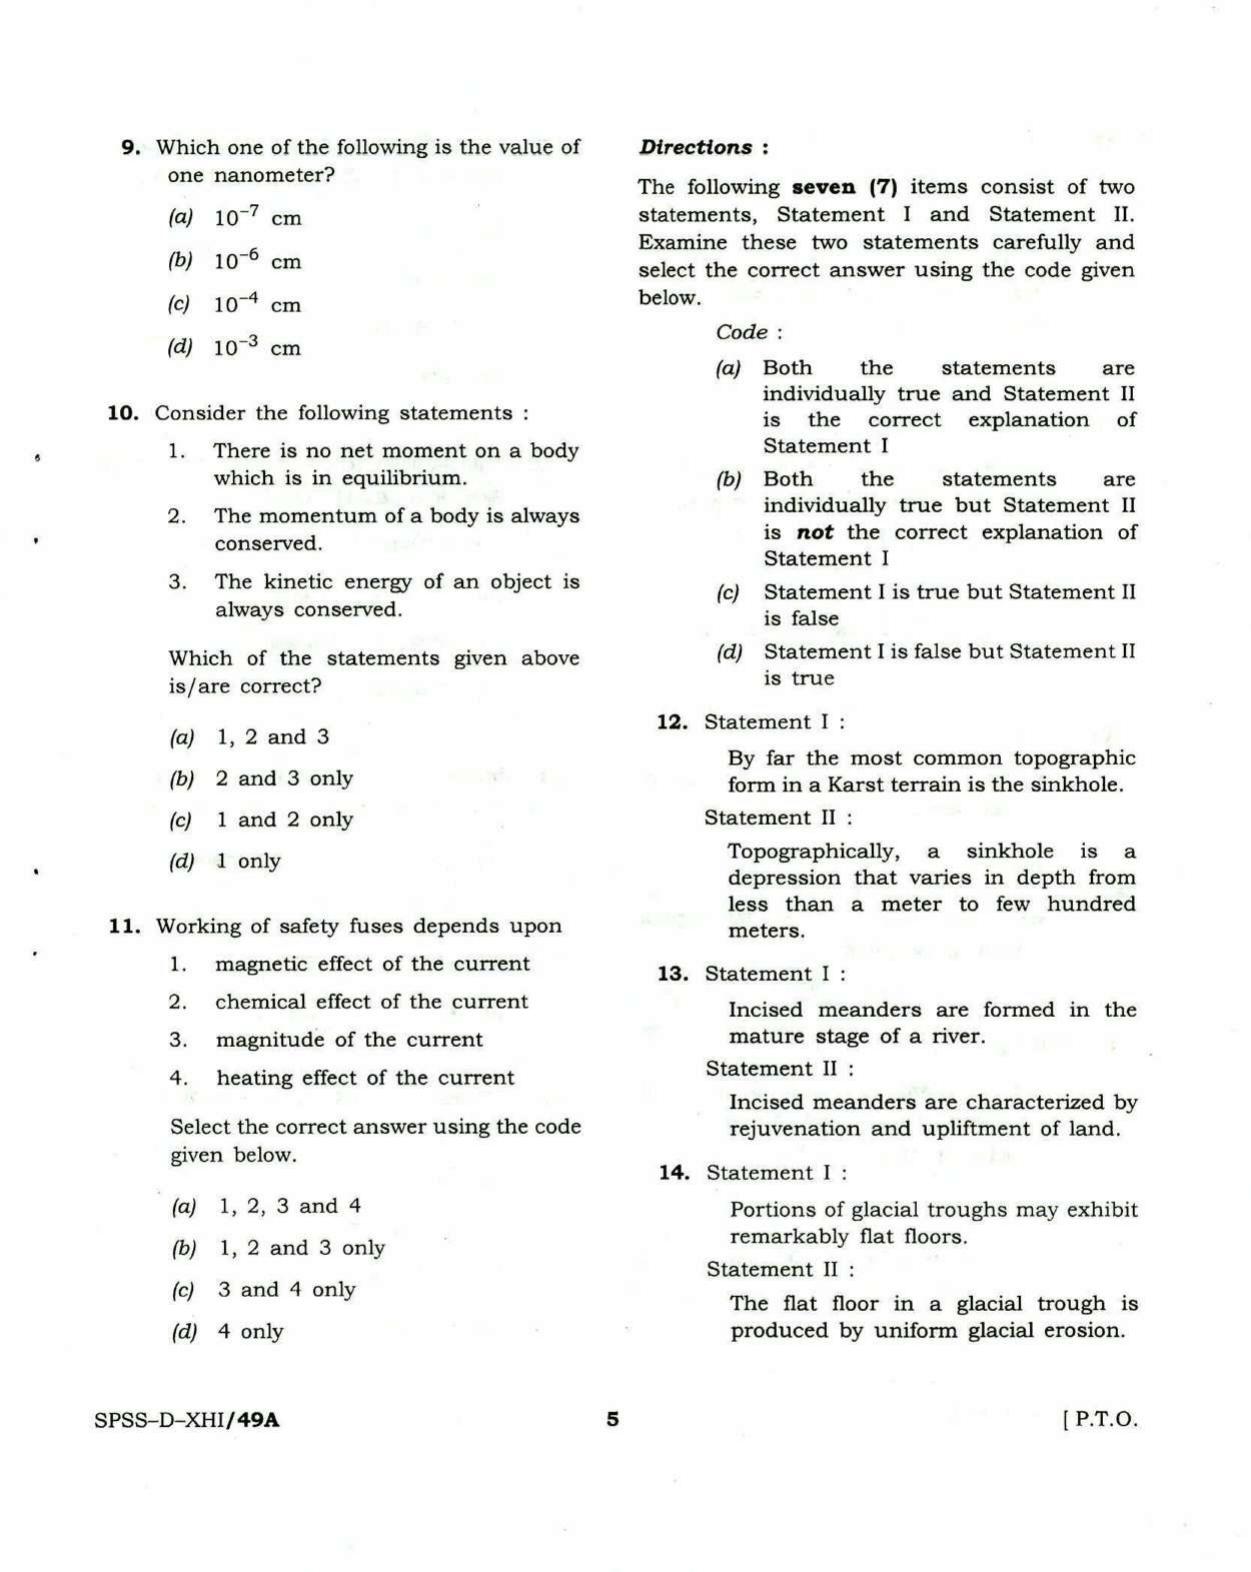 PBSSD General Knowledge Solved Papers - Page 5